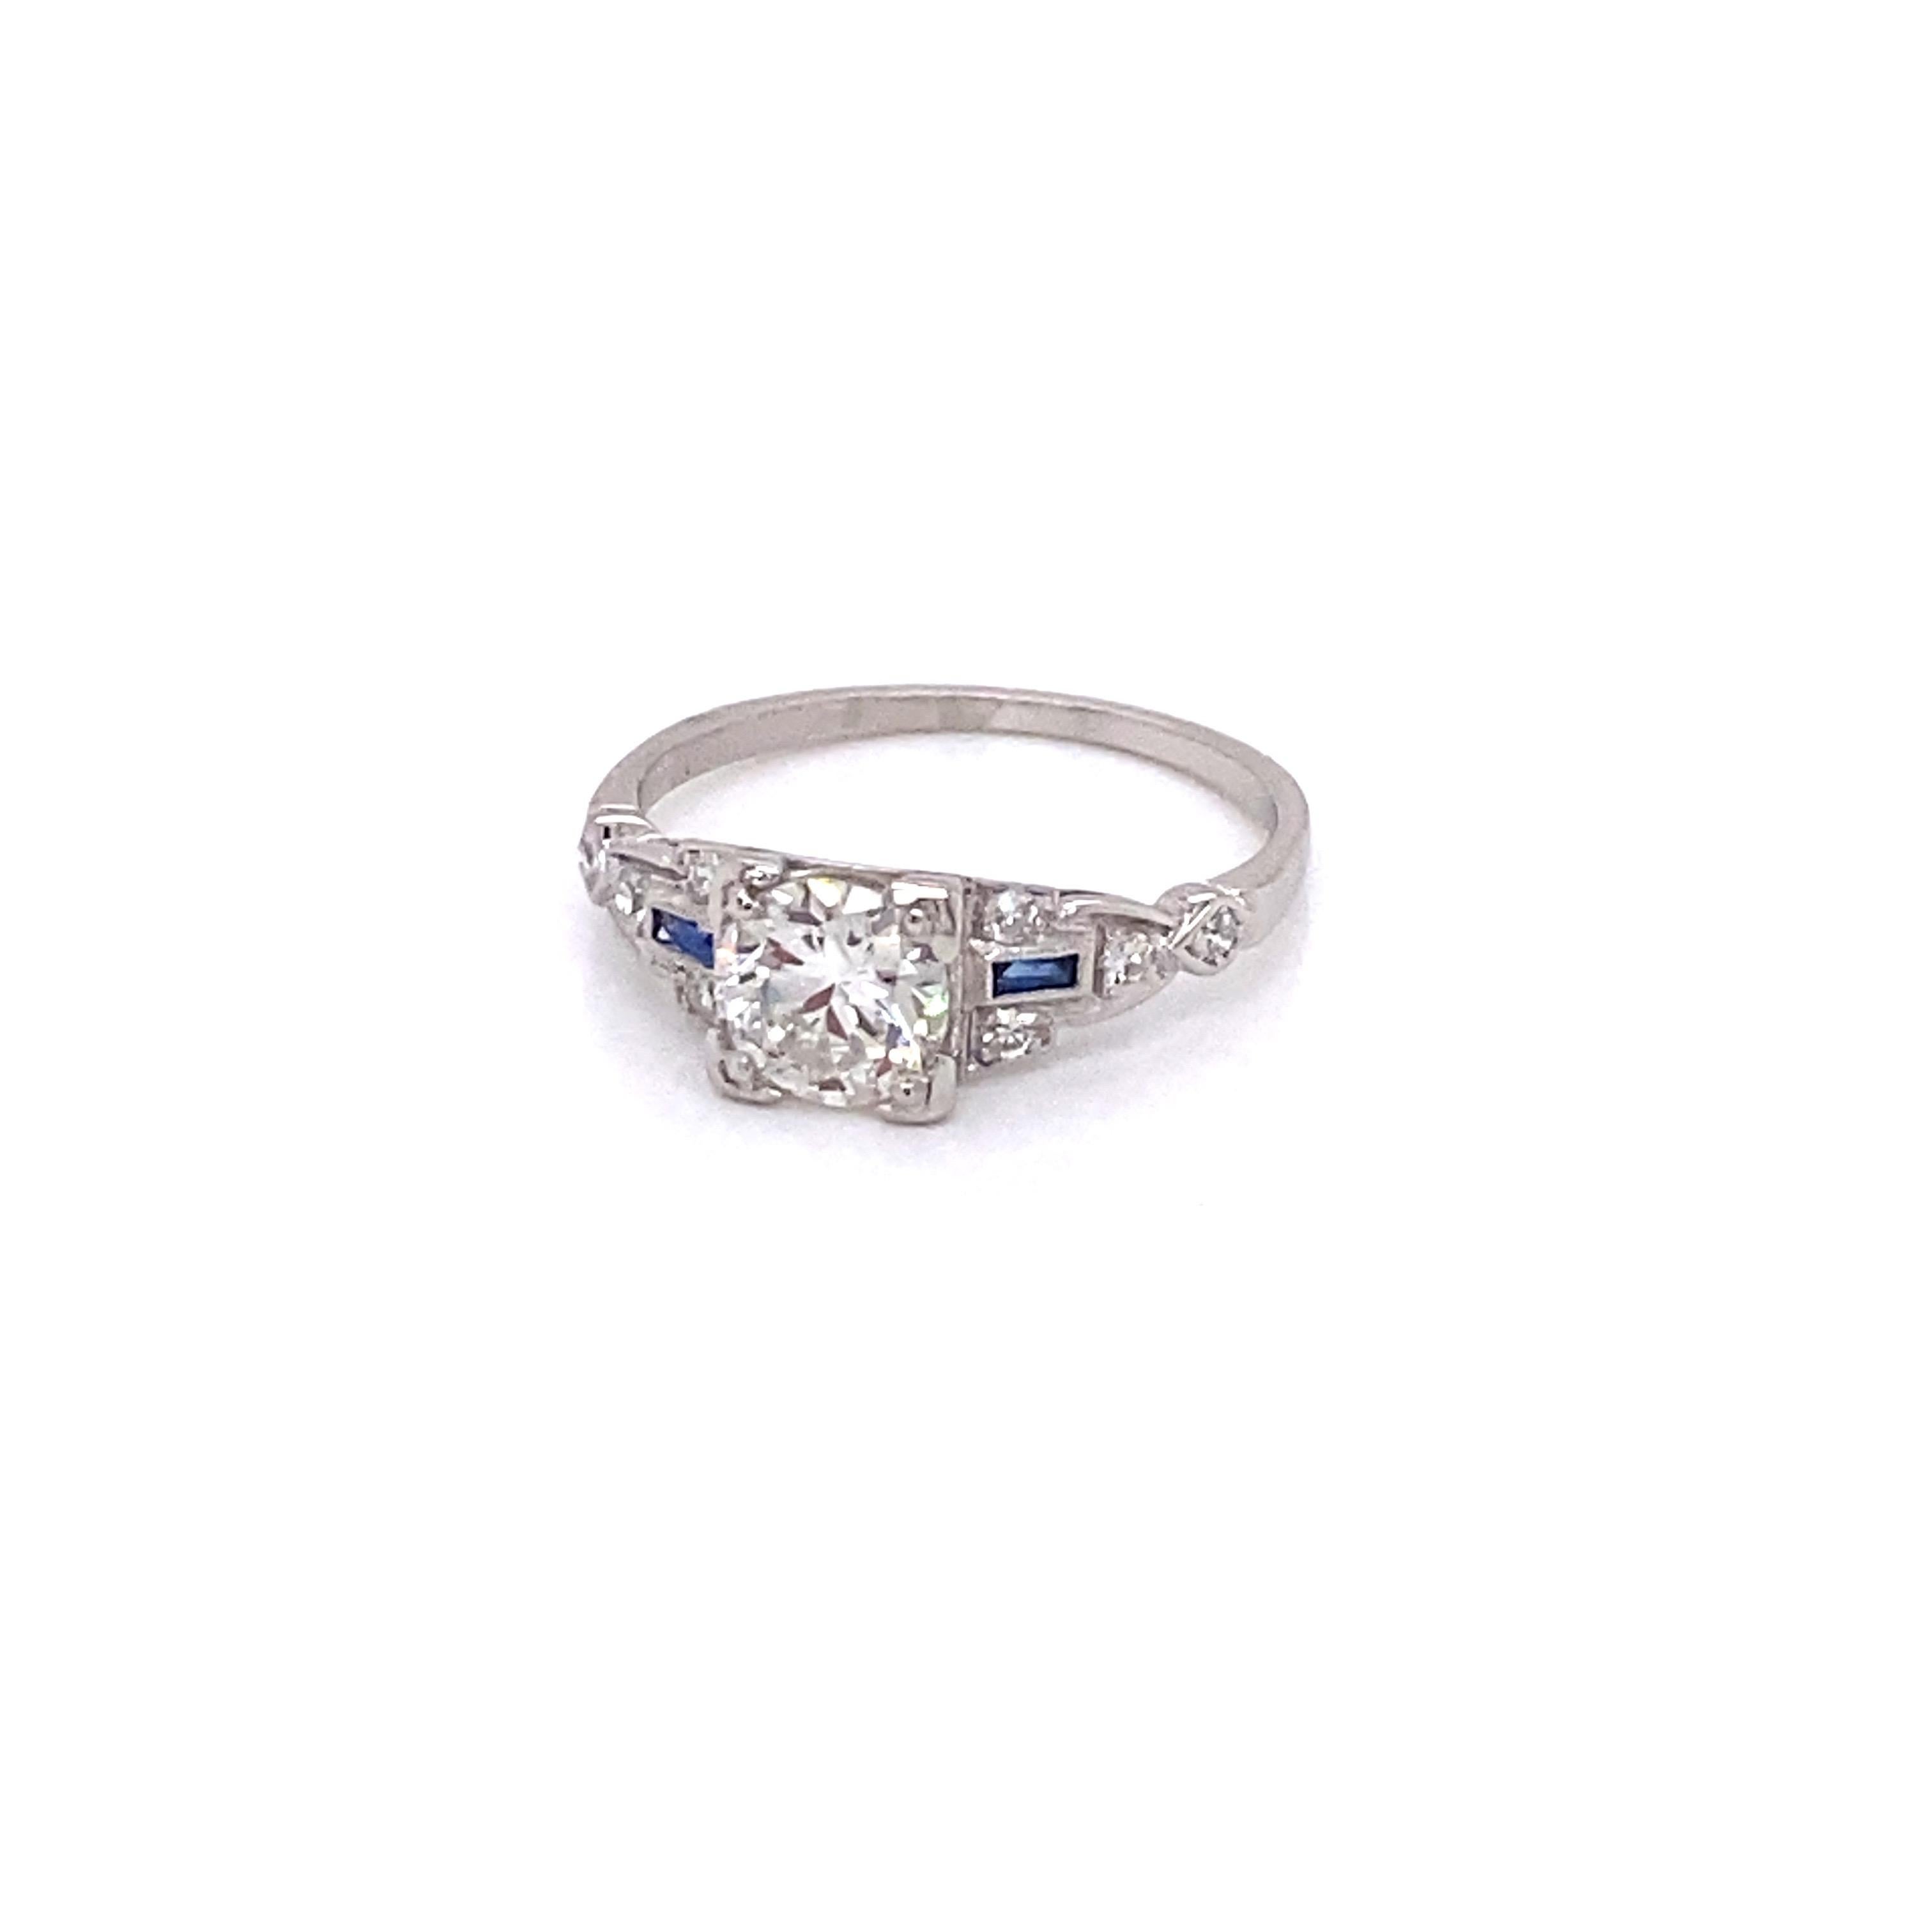 Vintage Art Deco European Cut Diamond Engagement Ring with Sapphires - The center European cut diamond weighs .83ct with I color and SI3 clarity. There are 8 single cut diamonds that weigh approximately .10ct and 2 sapphire French cut baguettes that